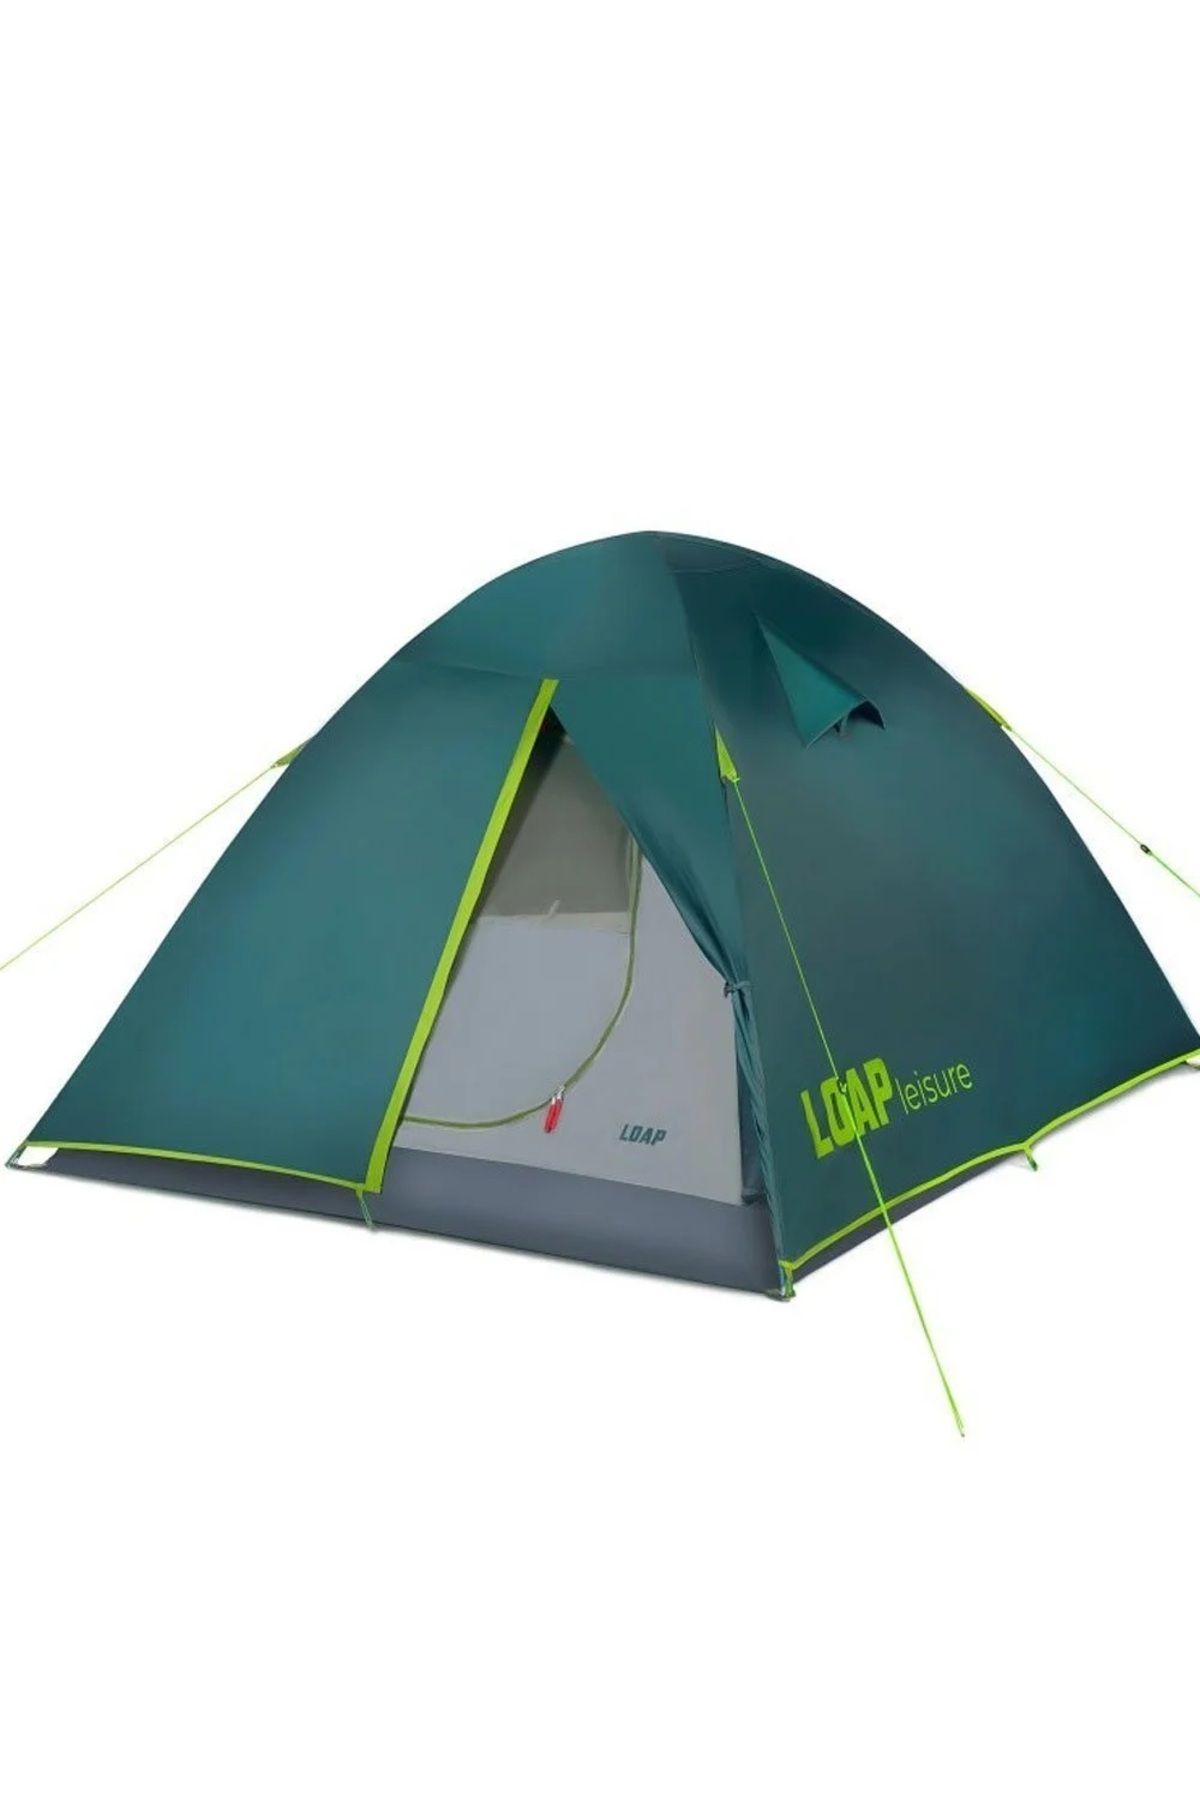 Loap Cloud 3 Tent For 3 Persons Deep Teal